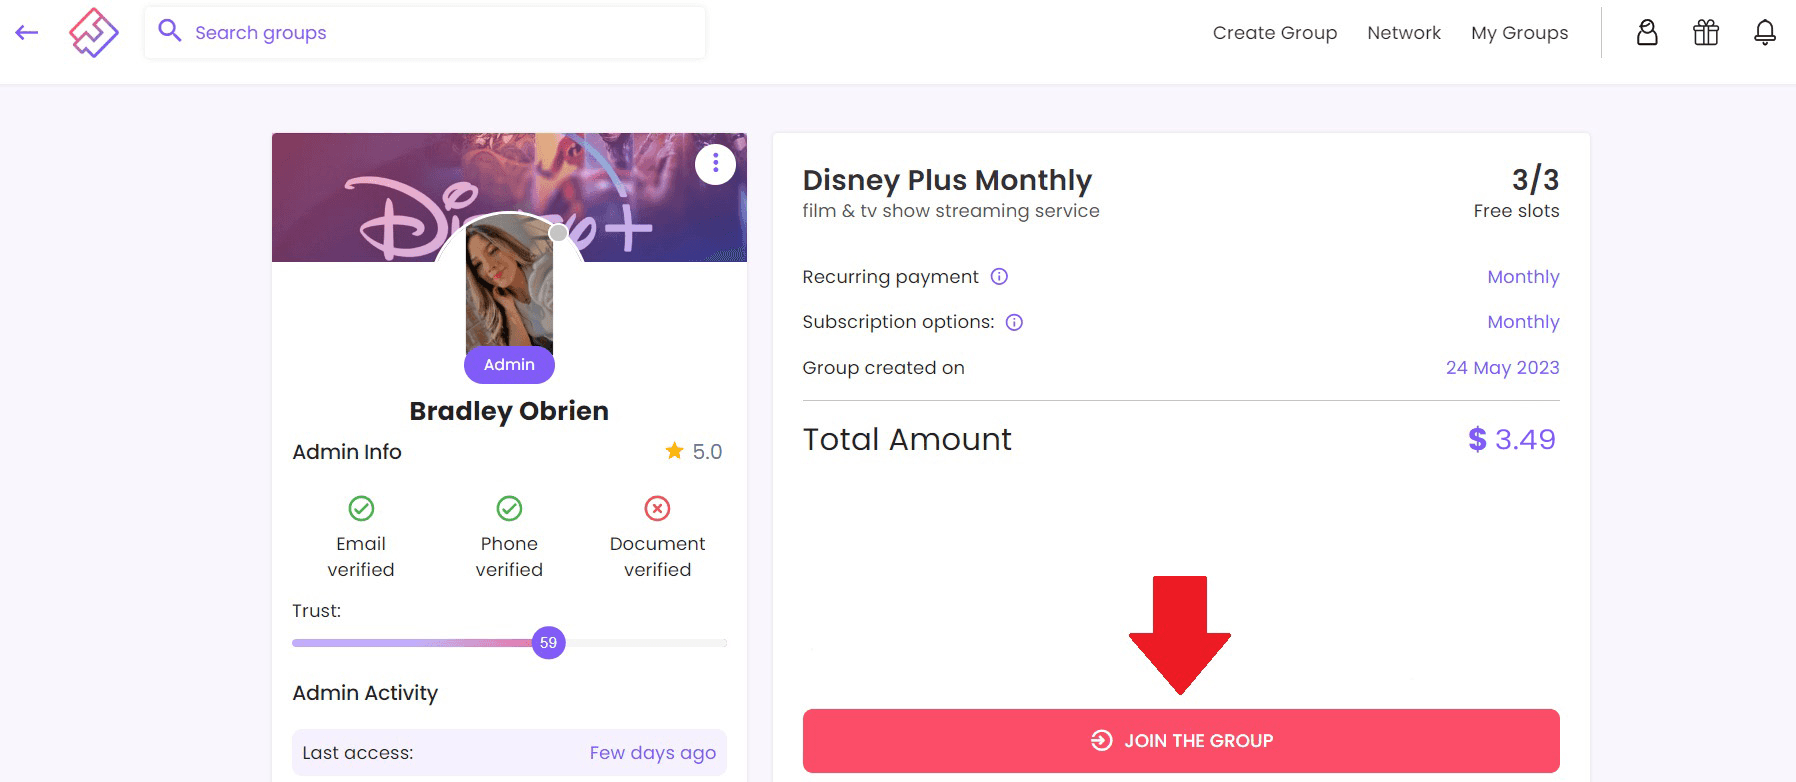 Follow three easy steps to subscribe and become a Joiner. 1. Find the sharing group. 2. Send the request. 3. Send your payment. And voila, you have Disney plus for a fraction of the price. 